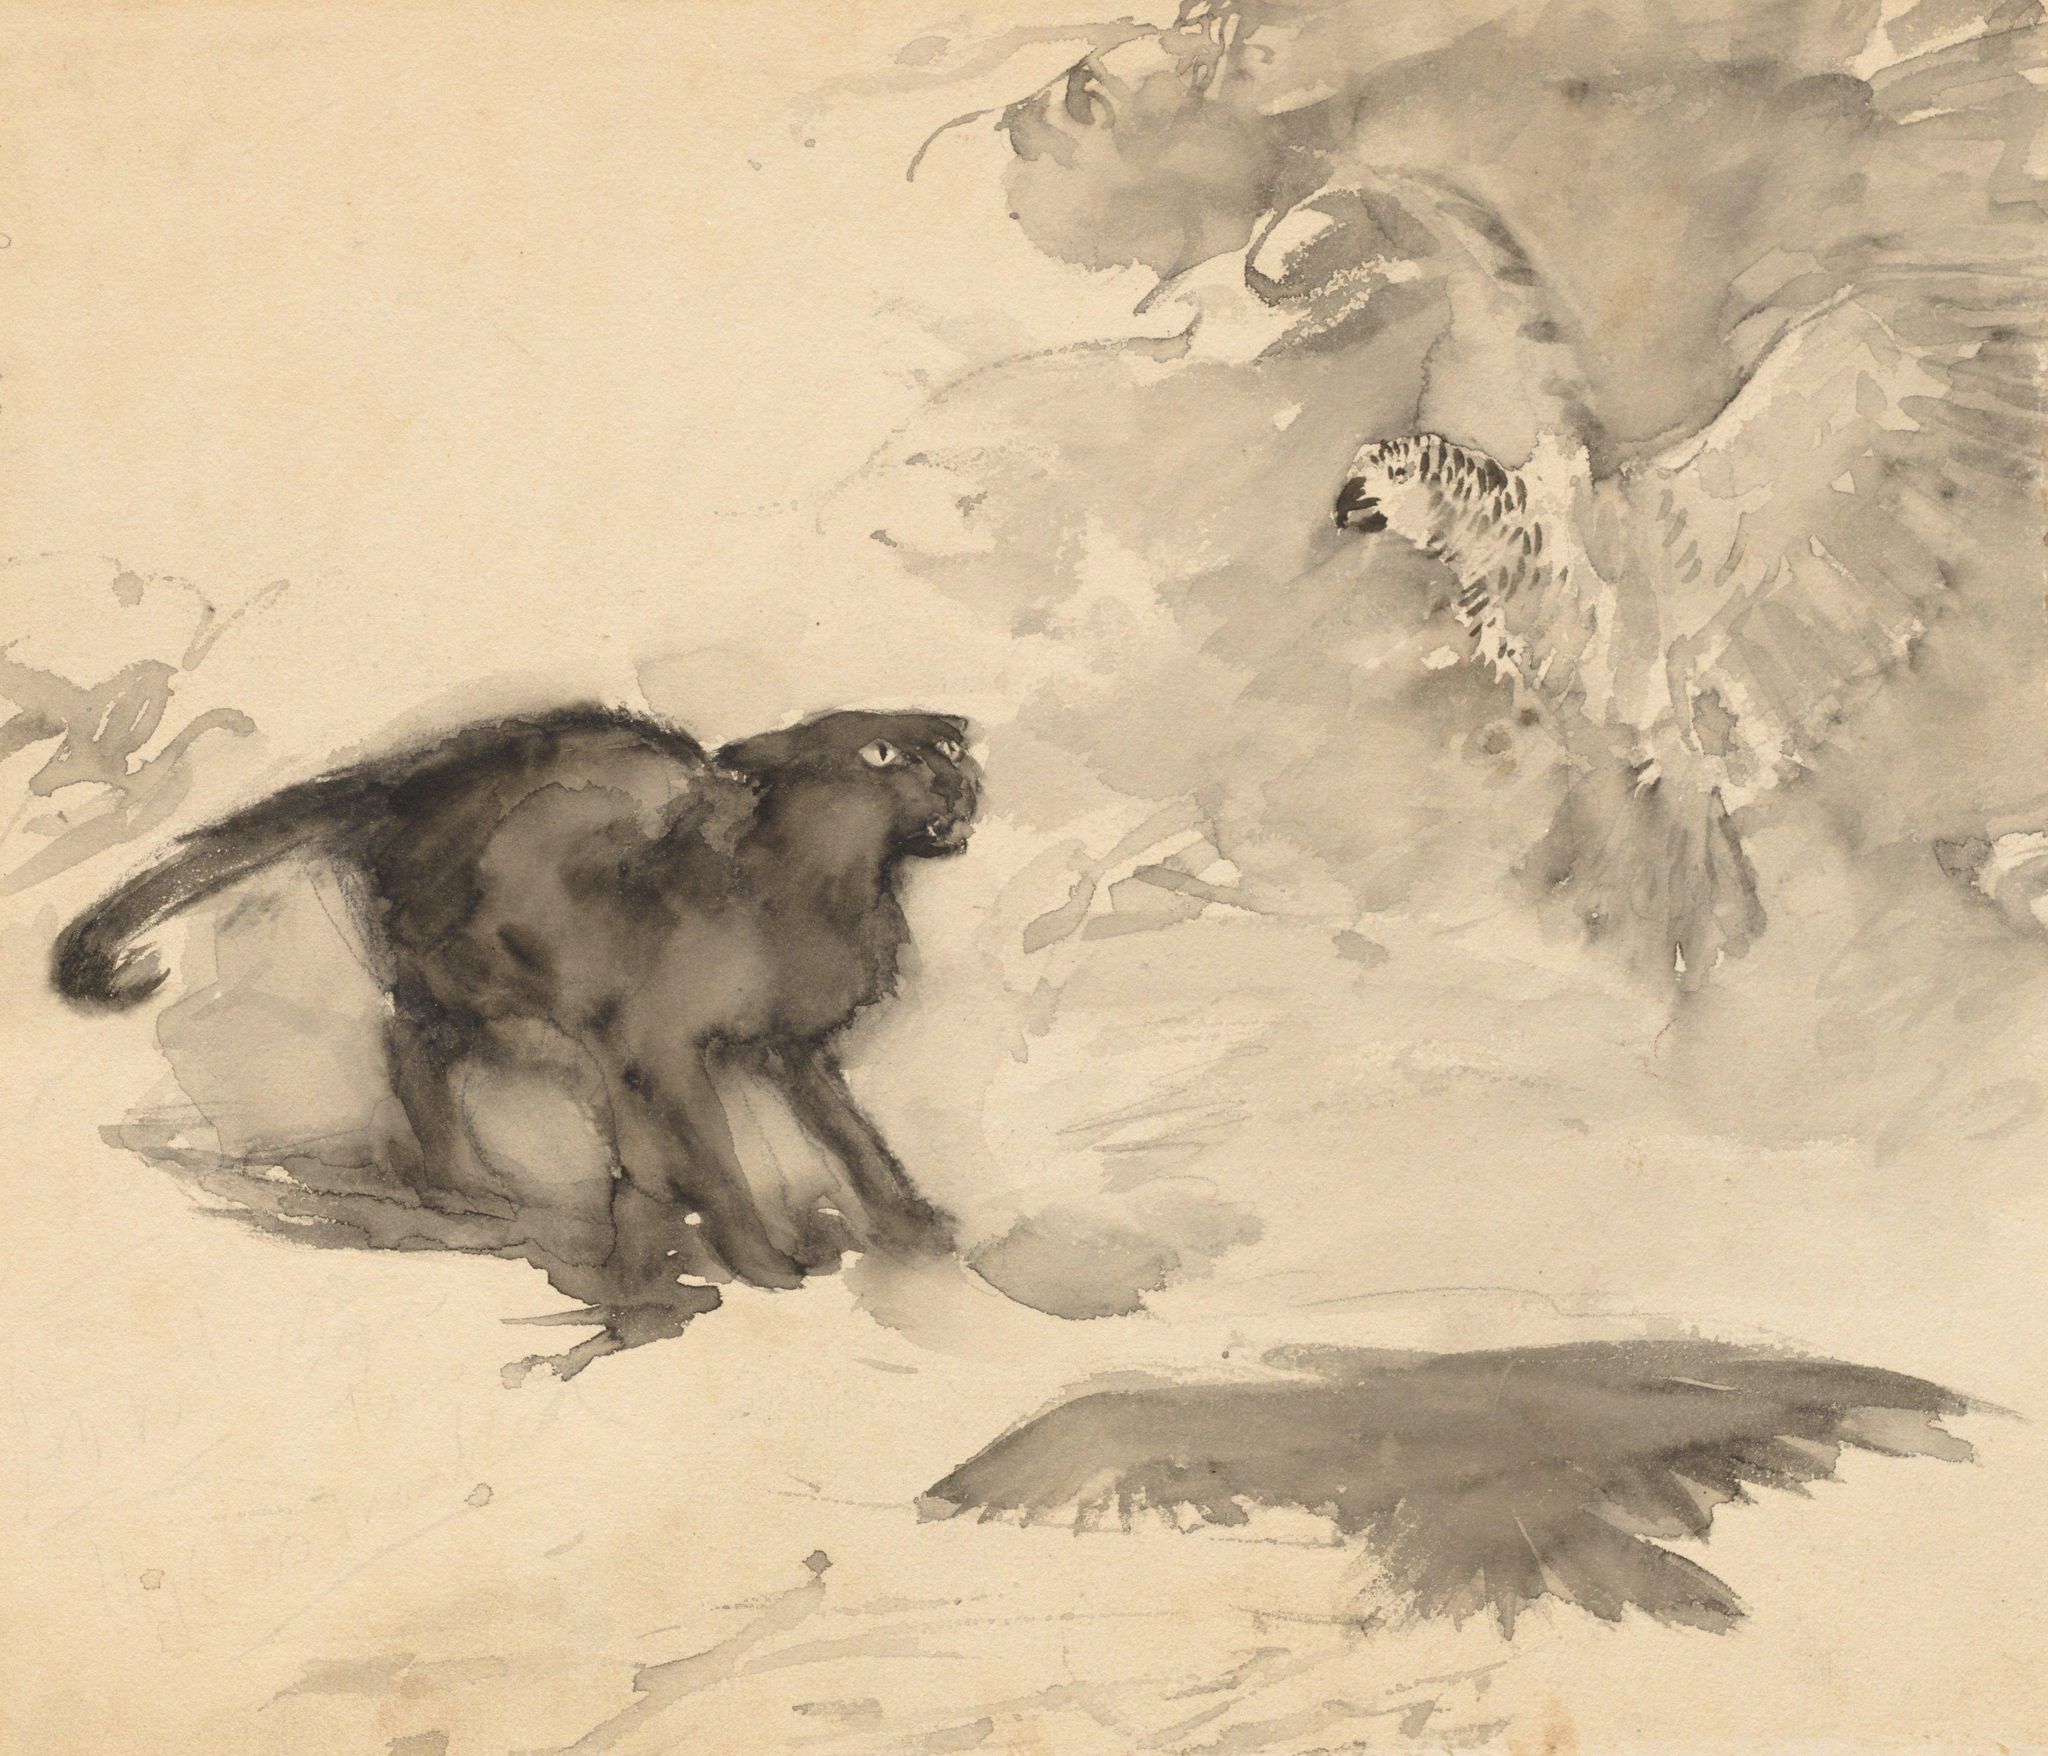 The Parrot and the Cat (Sketch for "Good-Night" by Eleanor Gates)